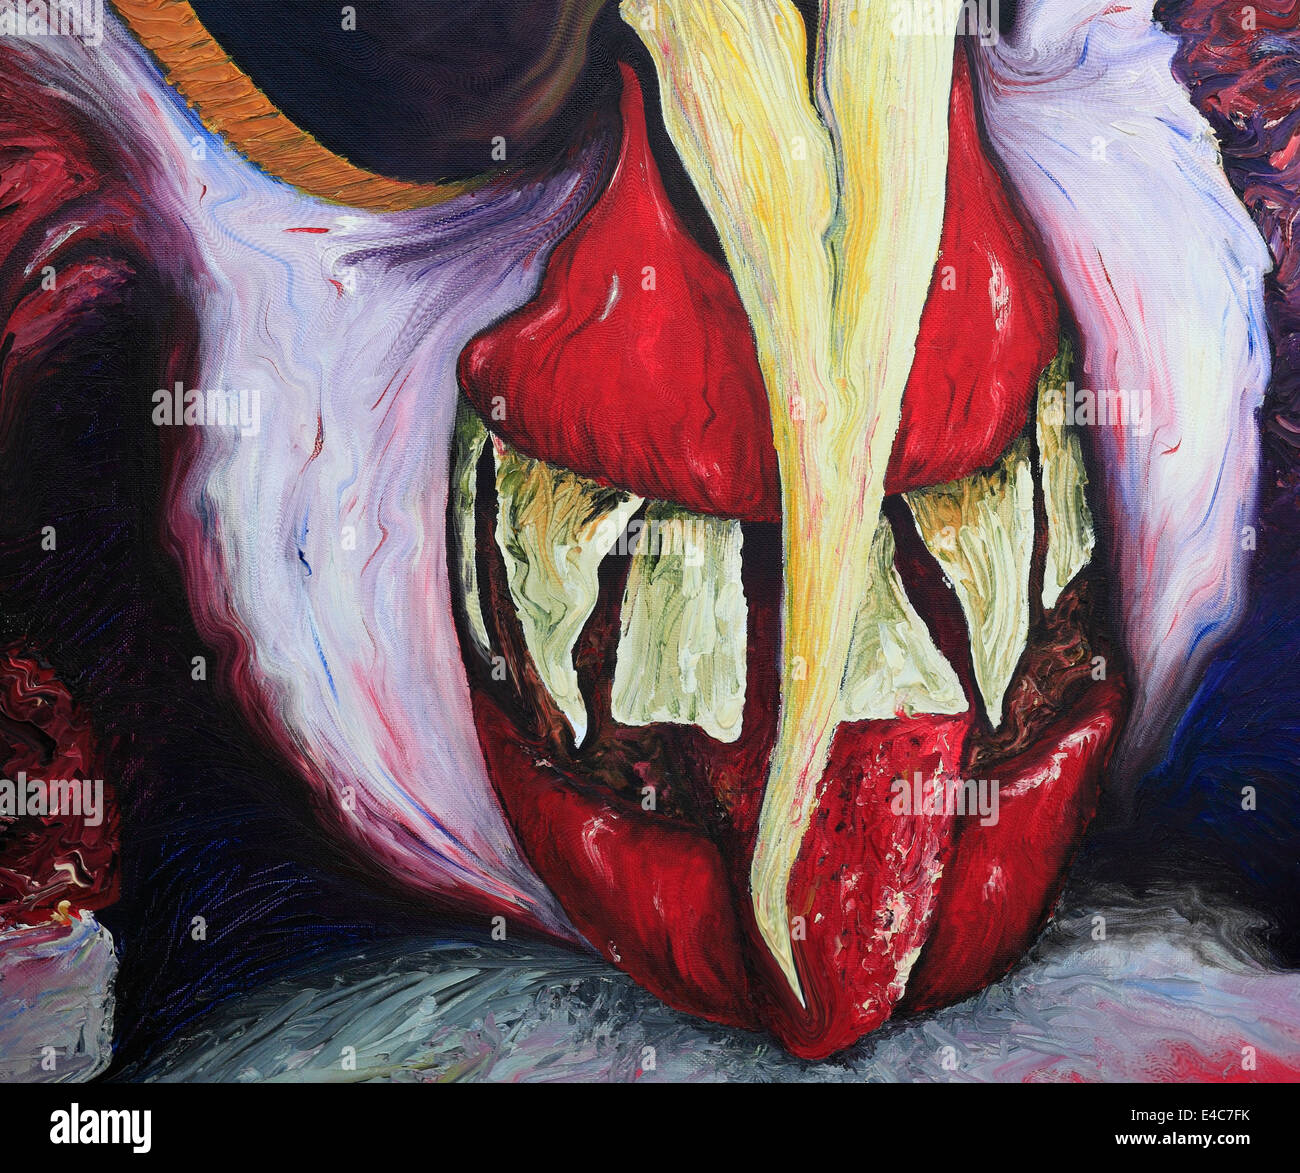 Photograph of a painting of a demon-like face. Stock Photo